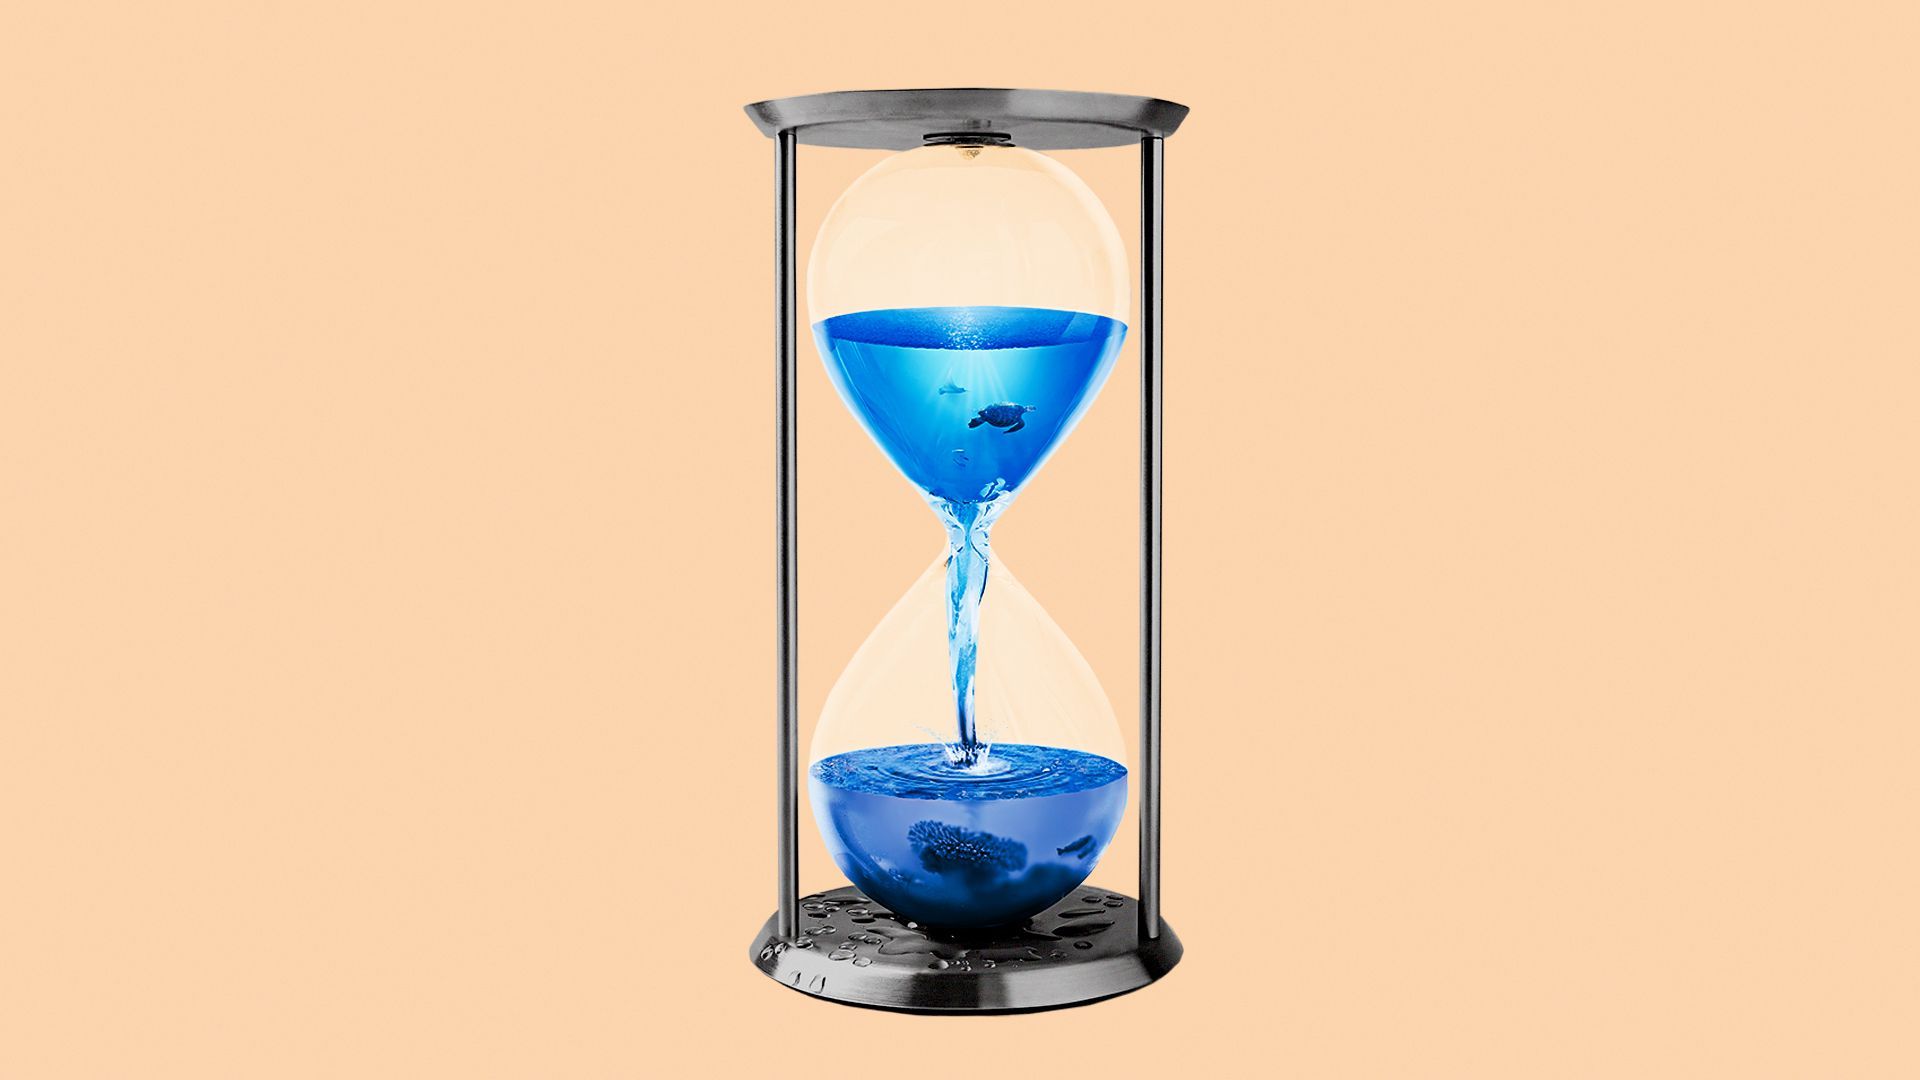 Illustration of an hourglass with water pouring through it.